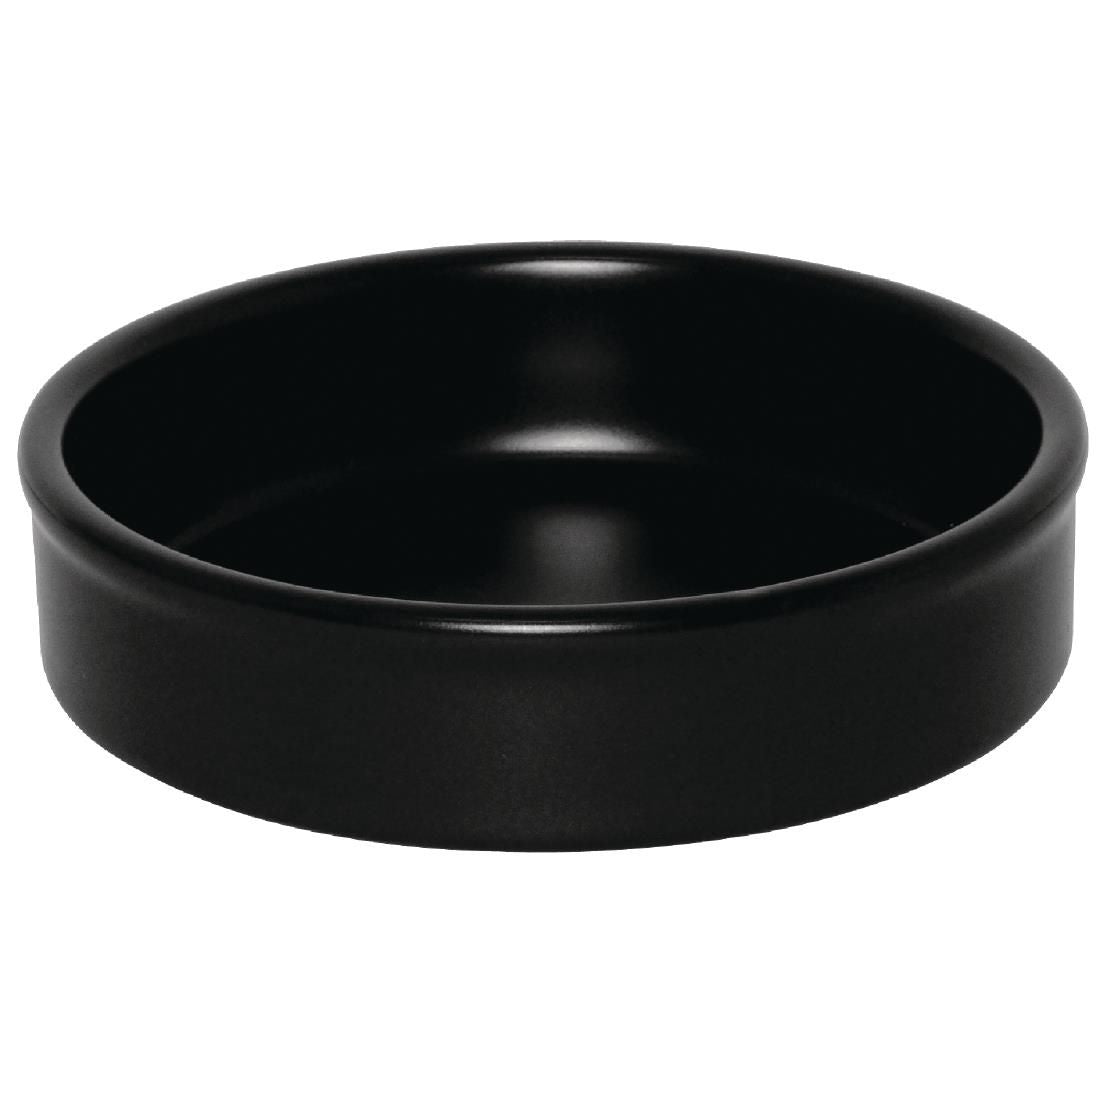 DK832 Olympia Mediterranean Stackable Dishes Black 102mm (Pack of 6) JD Catering Equipment Solutions Ltd